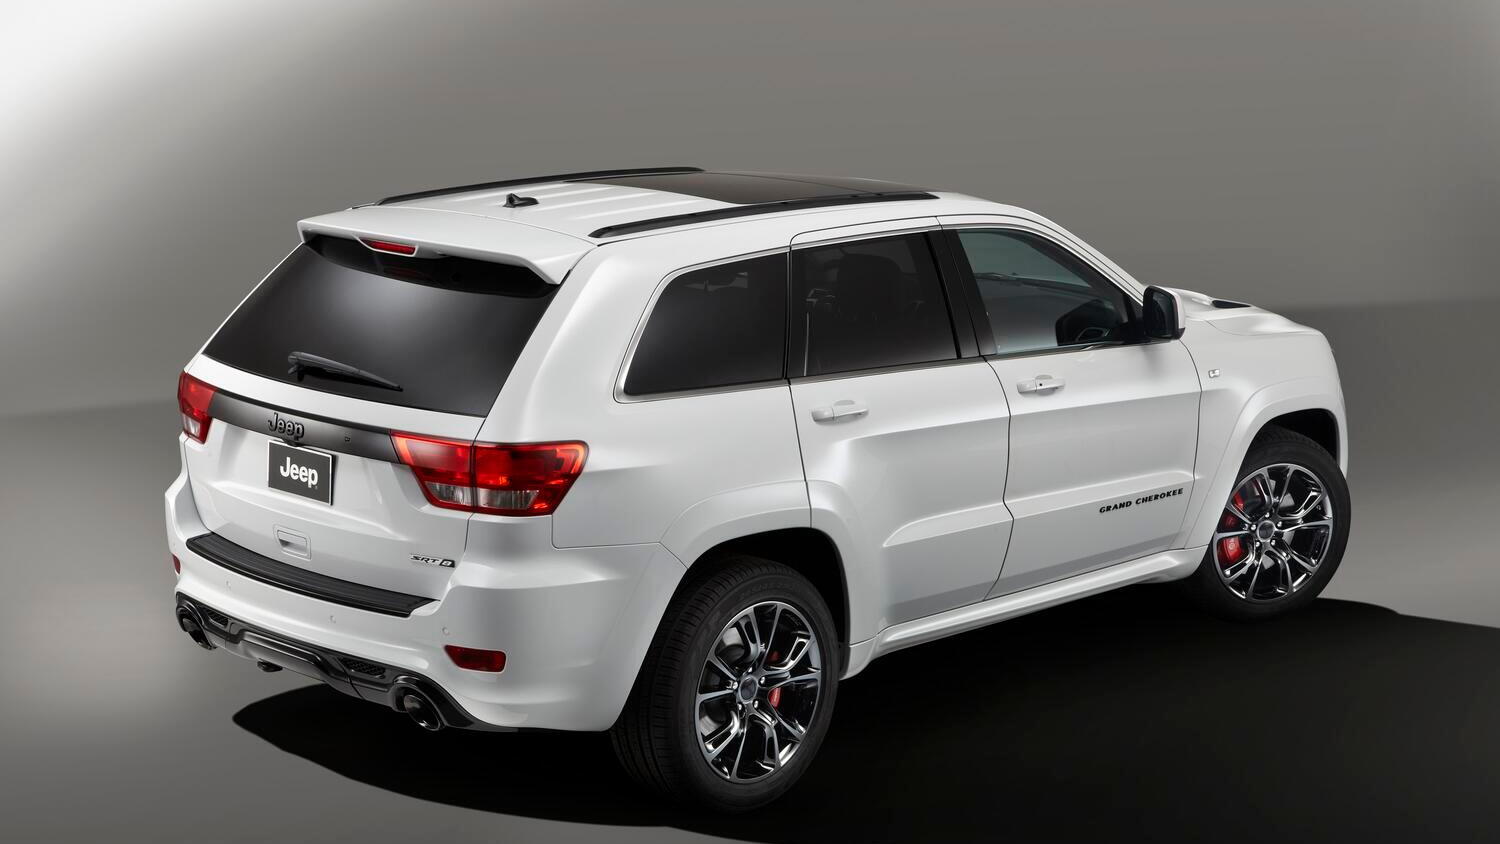 2013 Jeep Grand Cherokee SRT8 Limited Edition